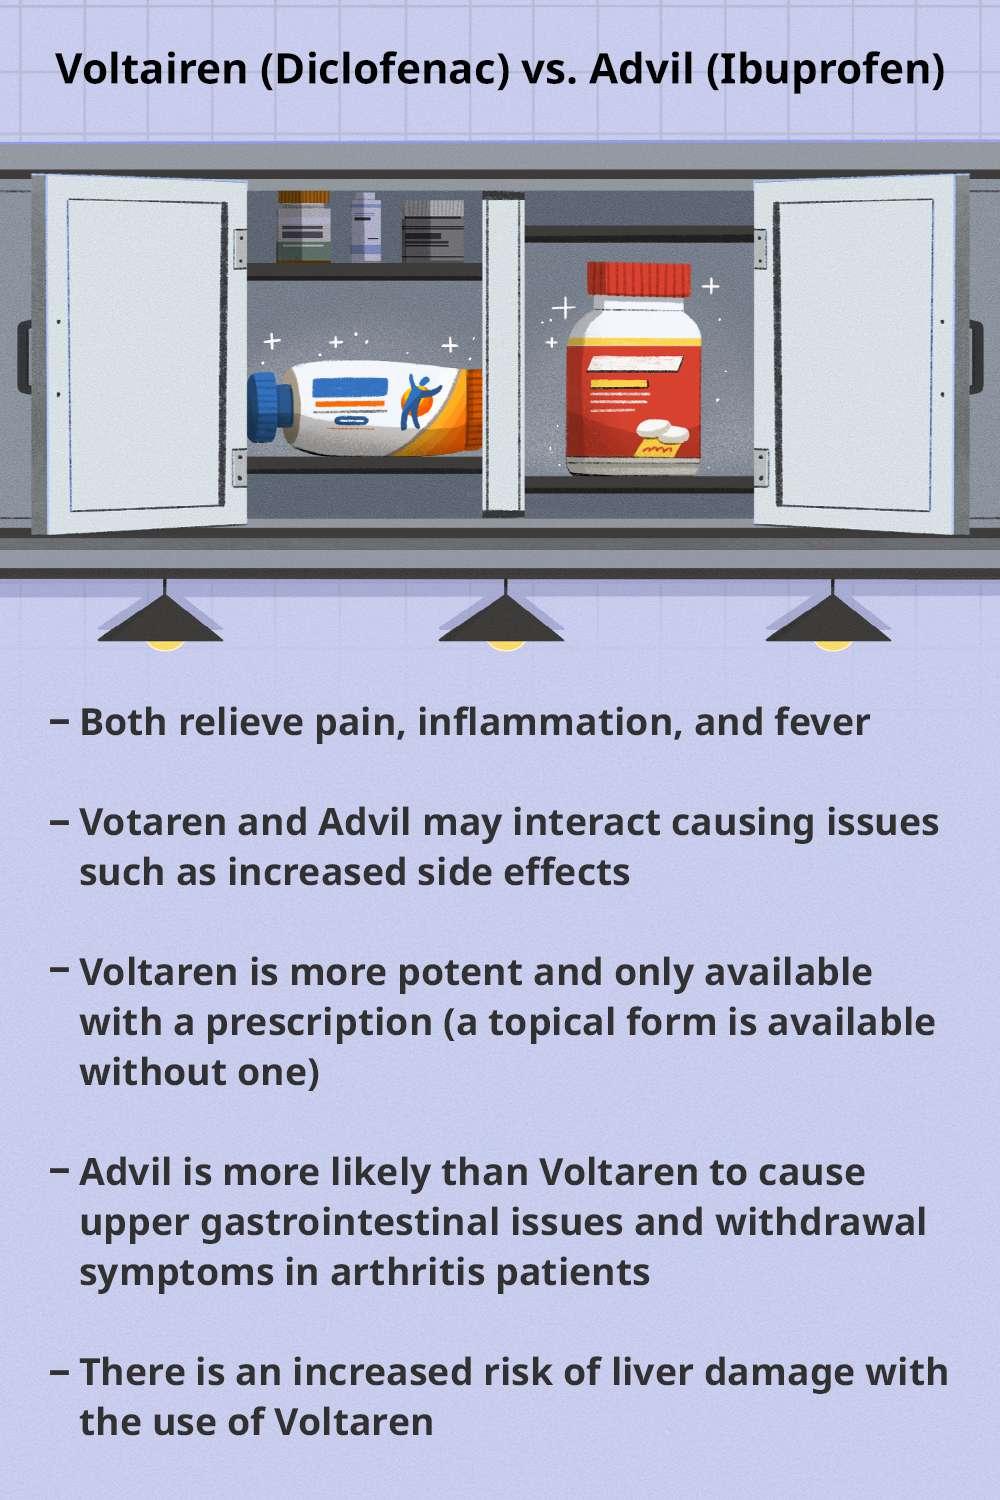 A comparison of Voltaren and Advil, both of which are used to relieve pain, inflammation, and fever.